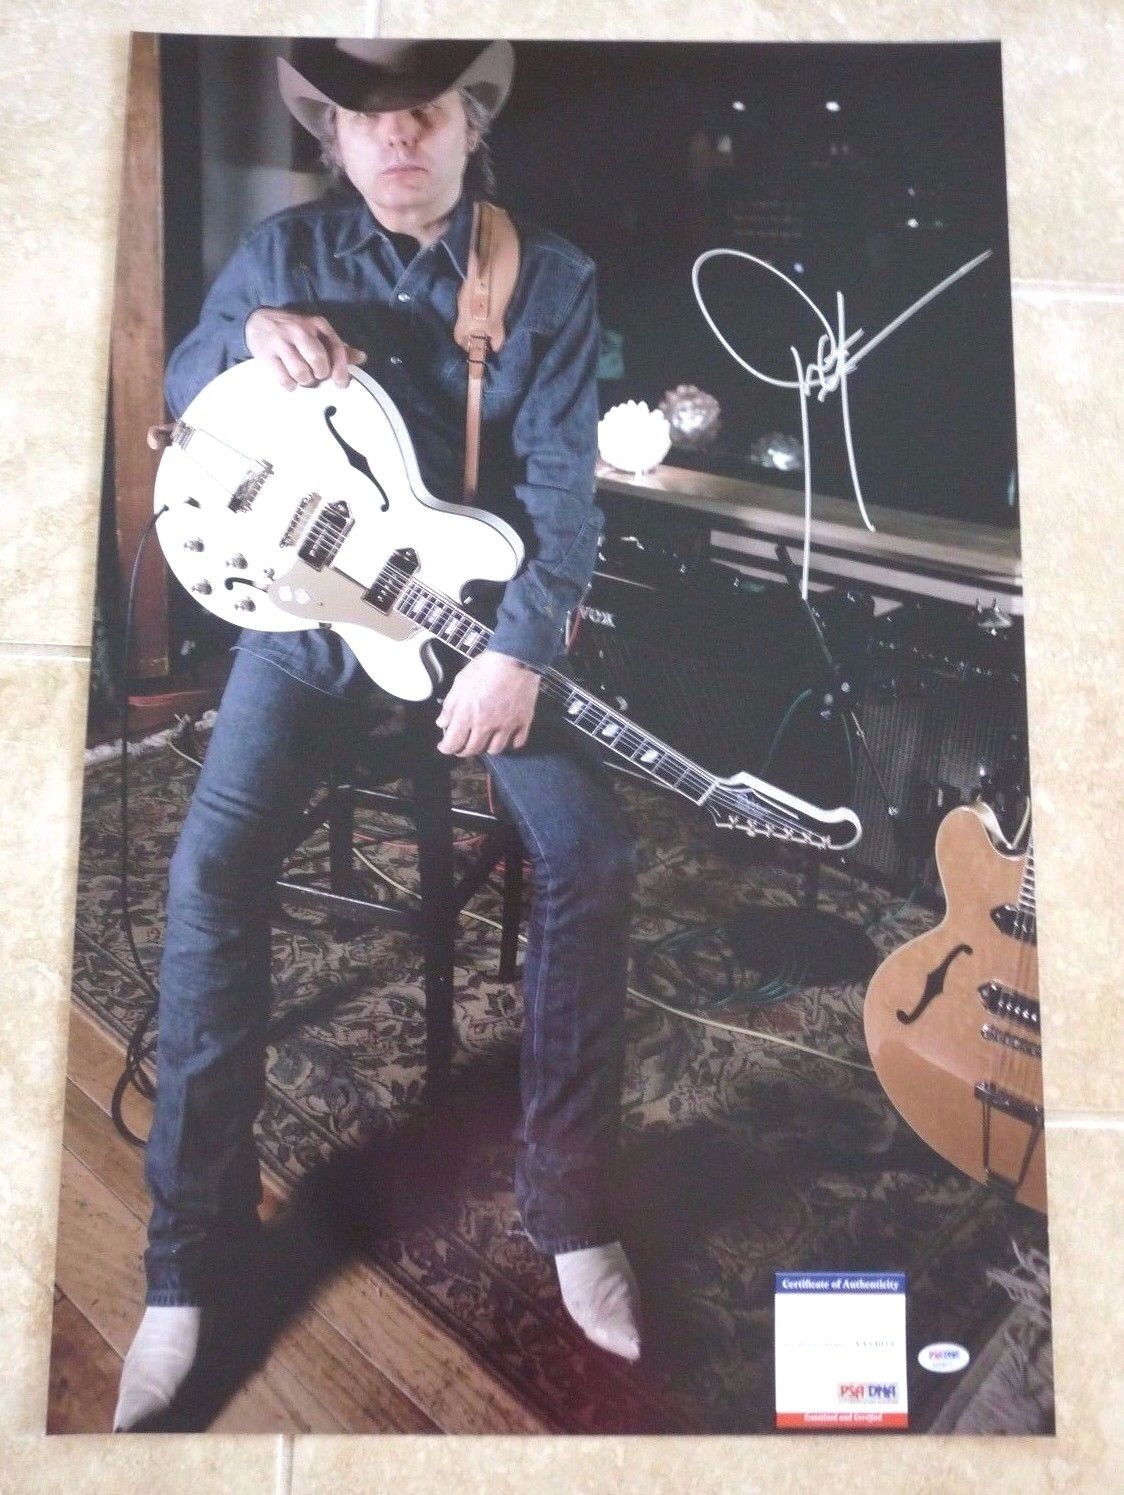 Dwight Yoakam Signed Autographed HUGE 20x30 MUSEUM QUALITY Photo Poster painting PSA Certified 7